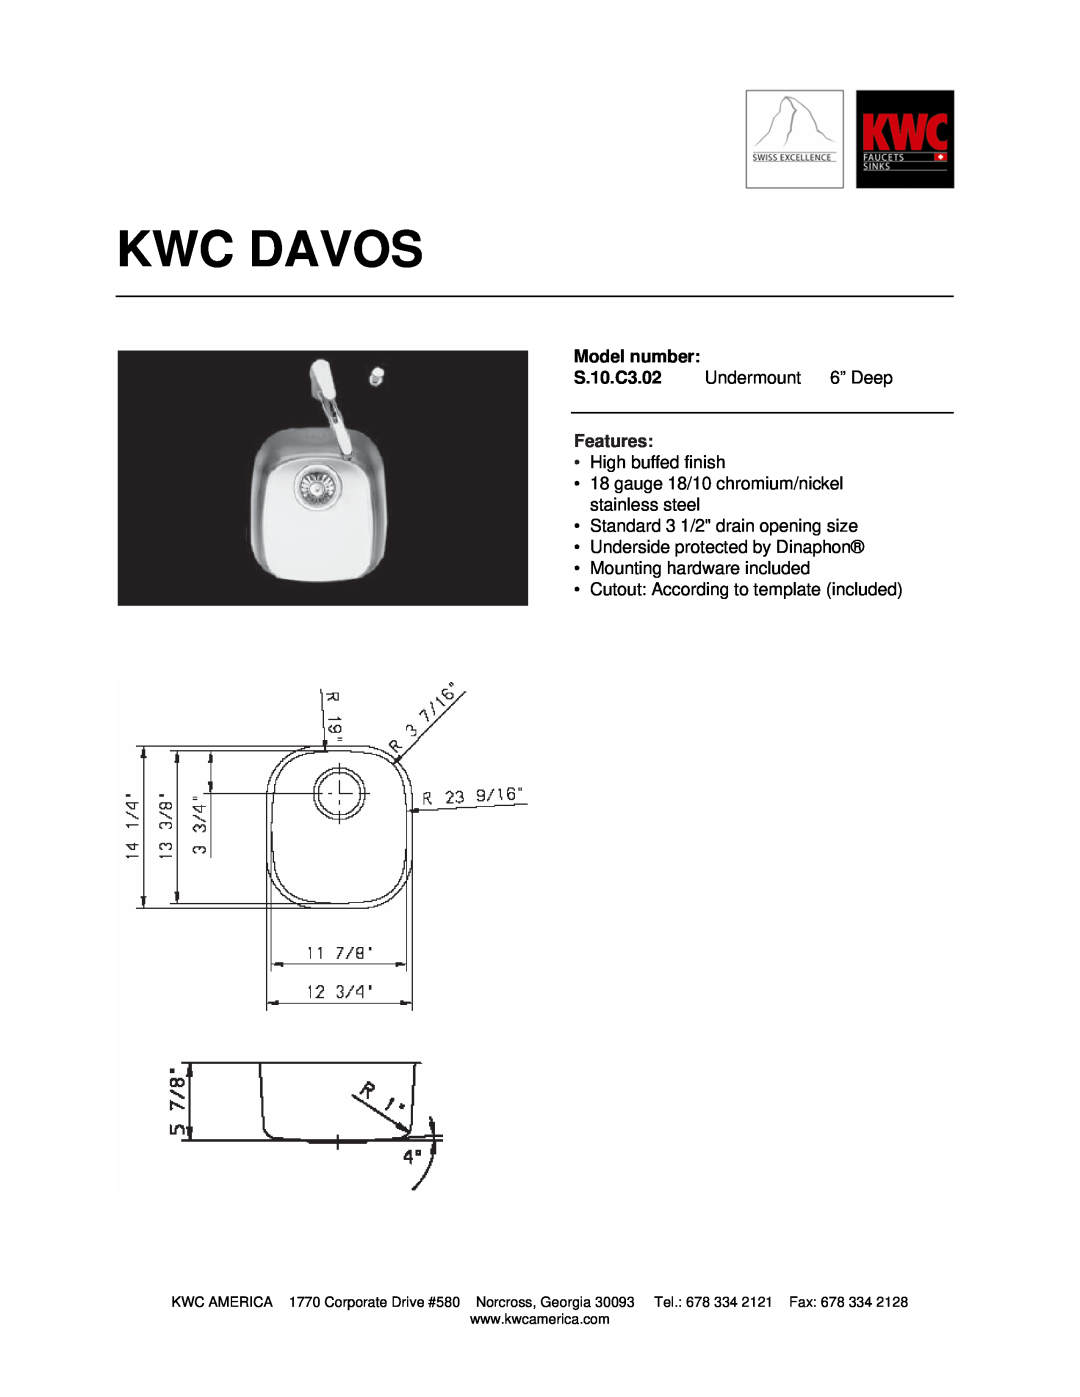 KWC S.10.C3.02 manual Kwc Davos, Model number, Features 